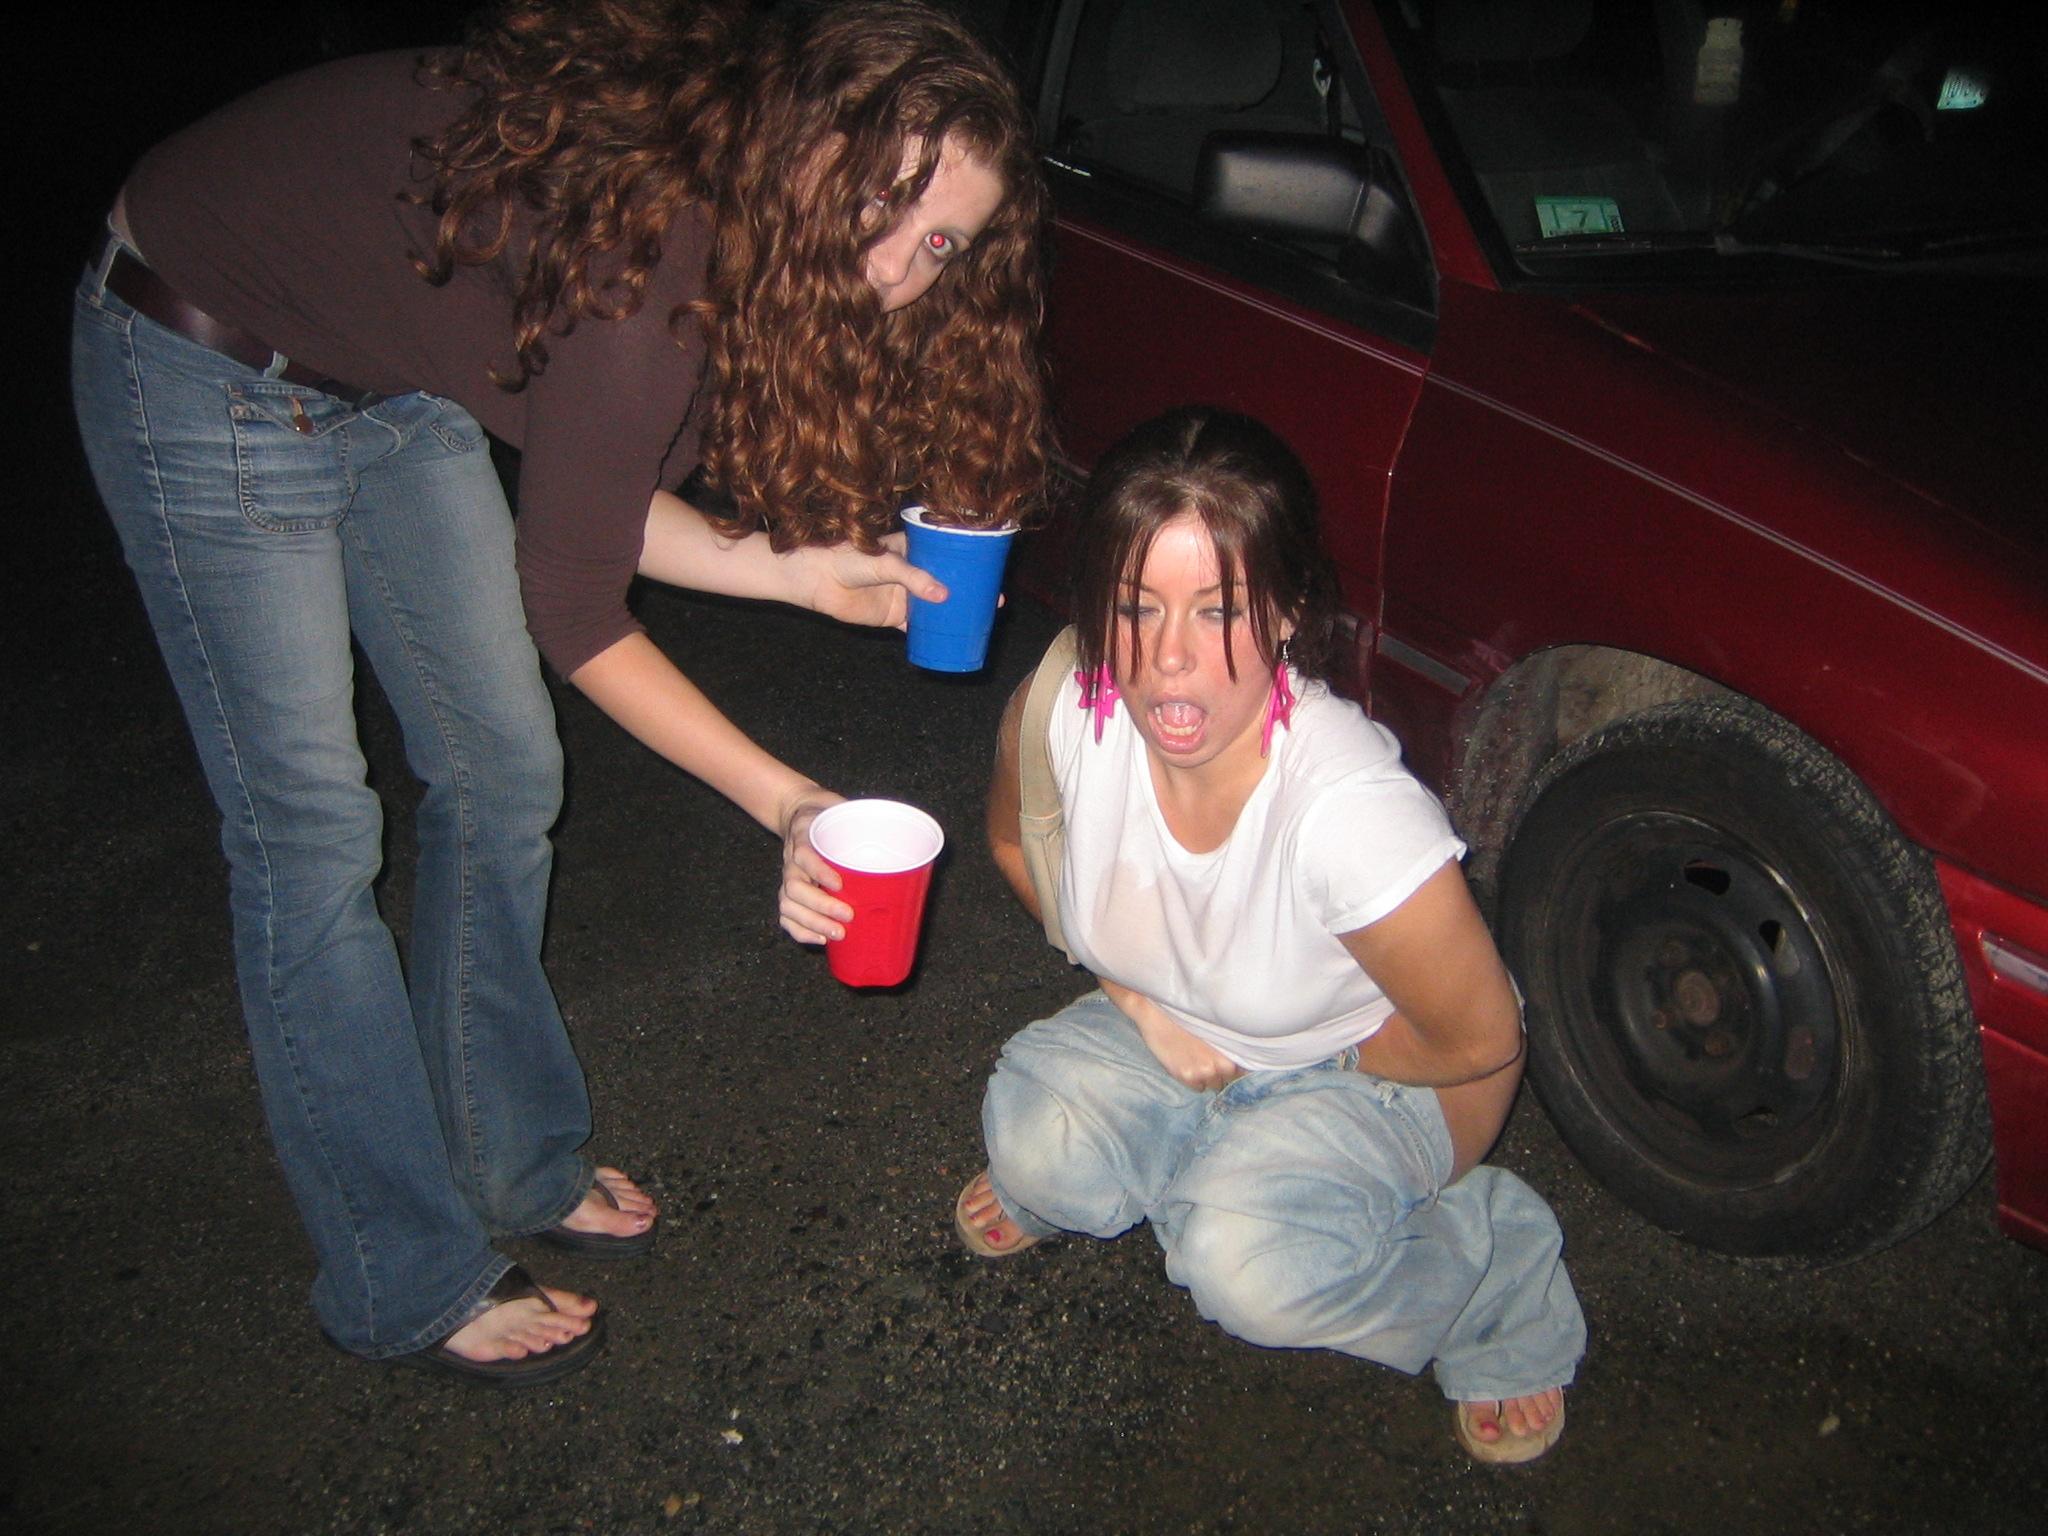 Girl peeing at a party